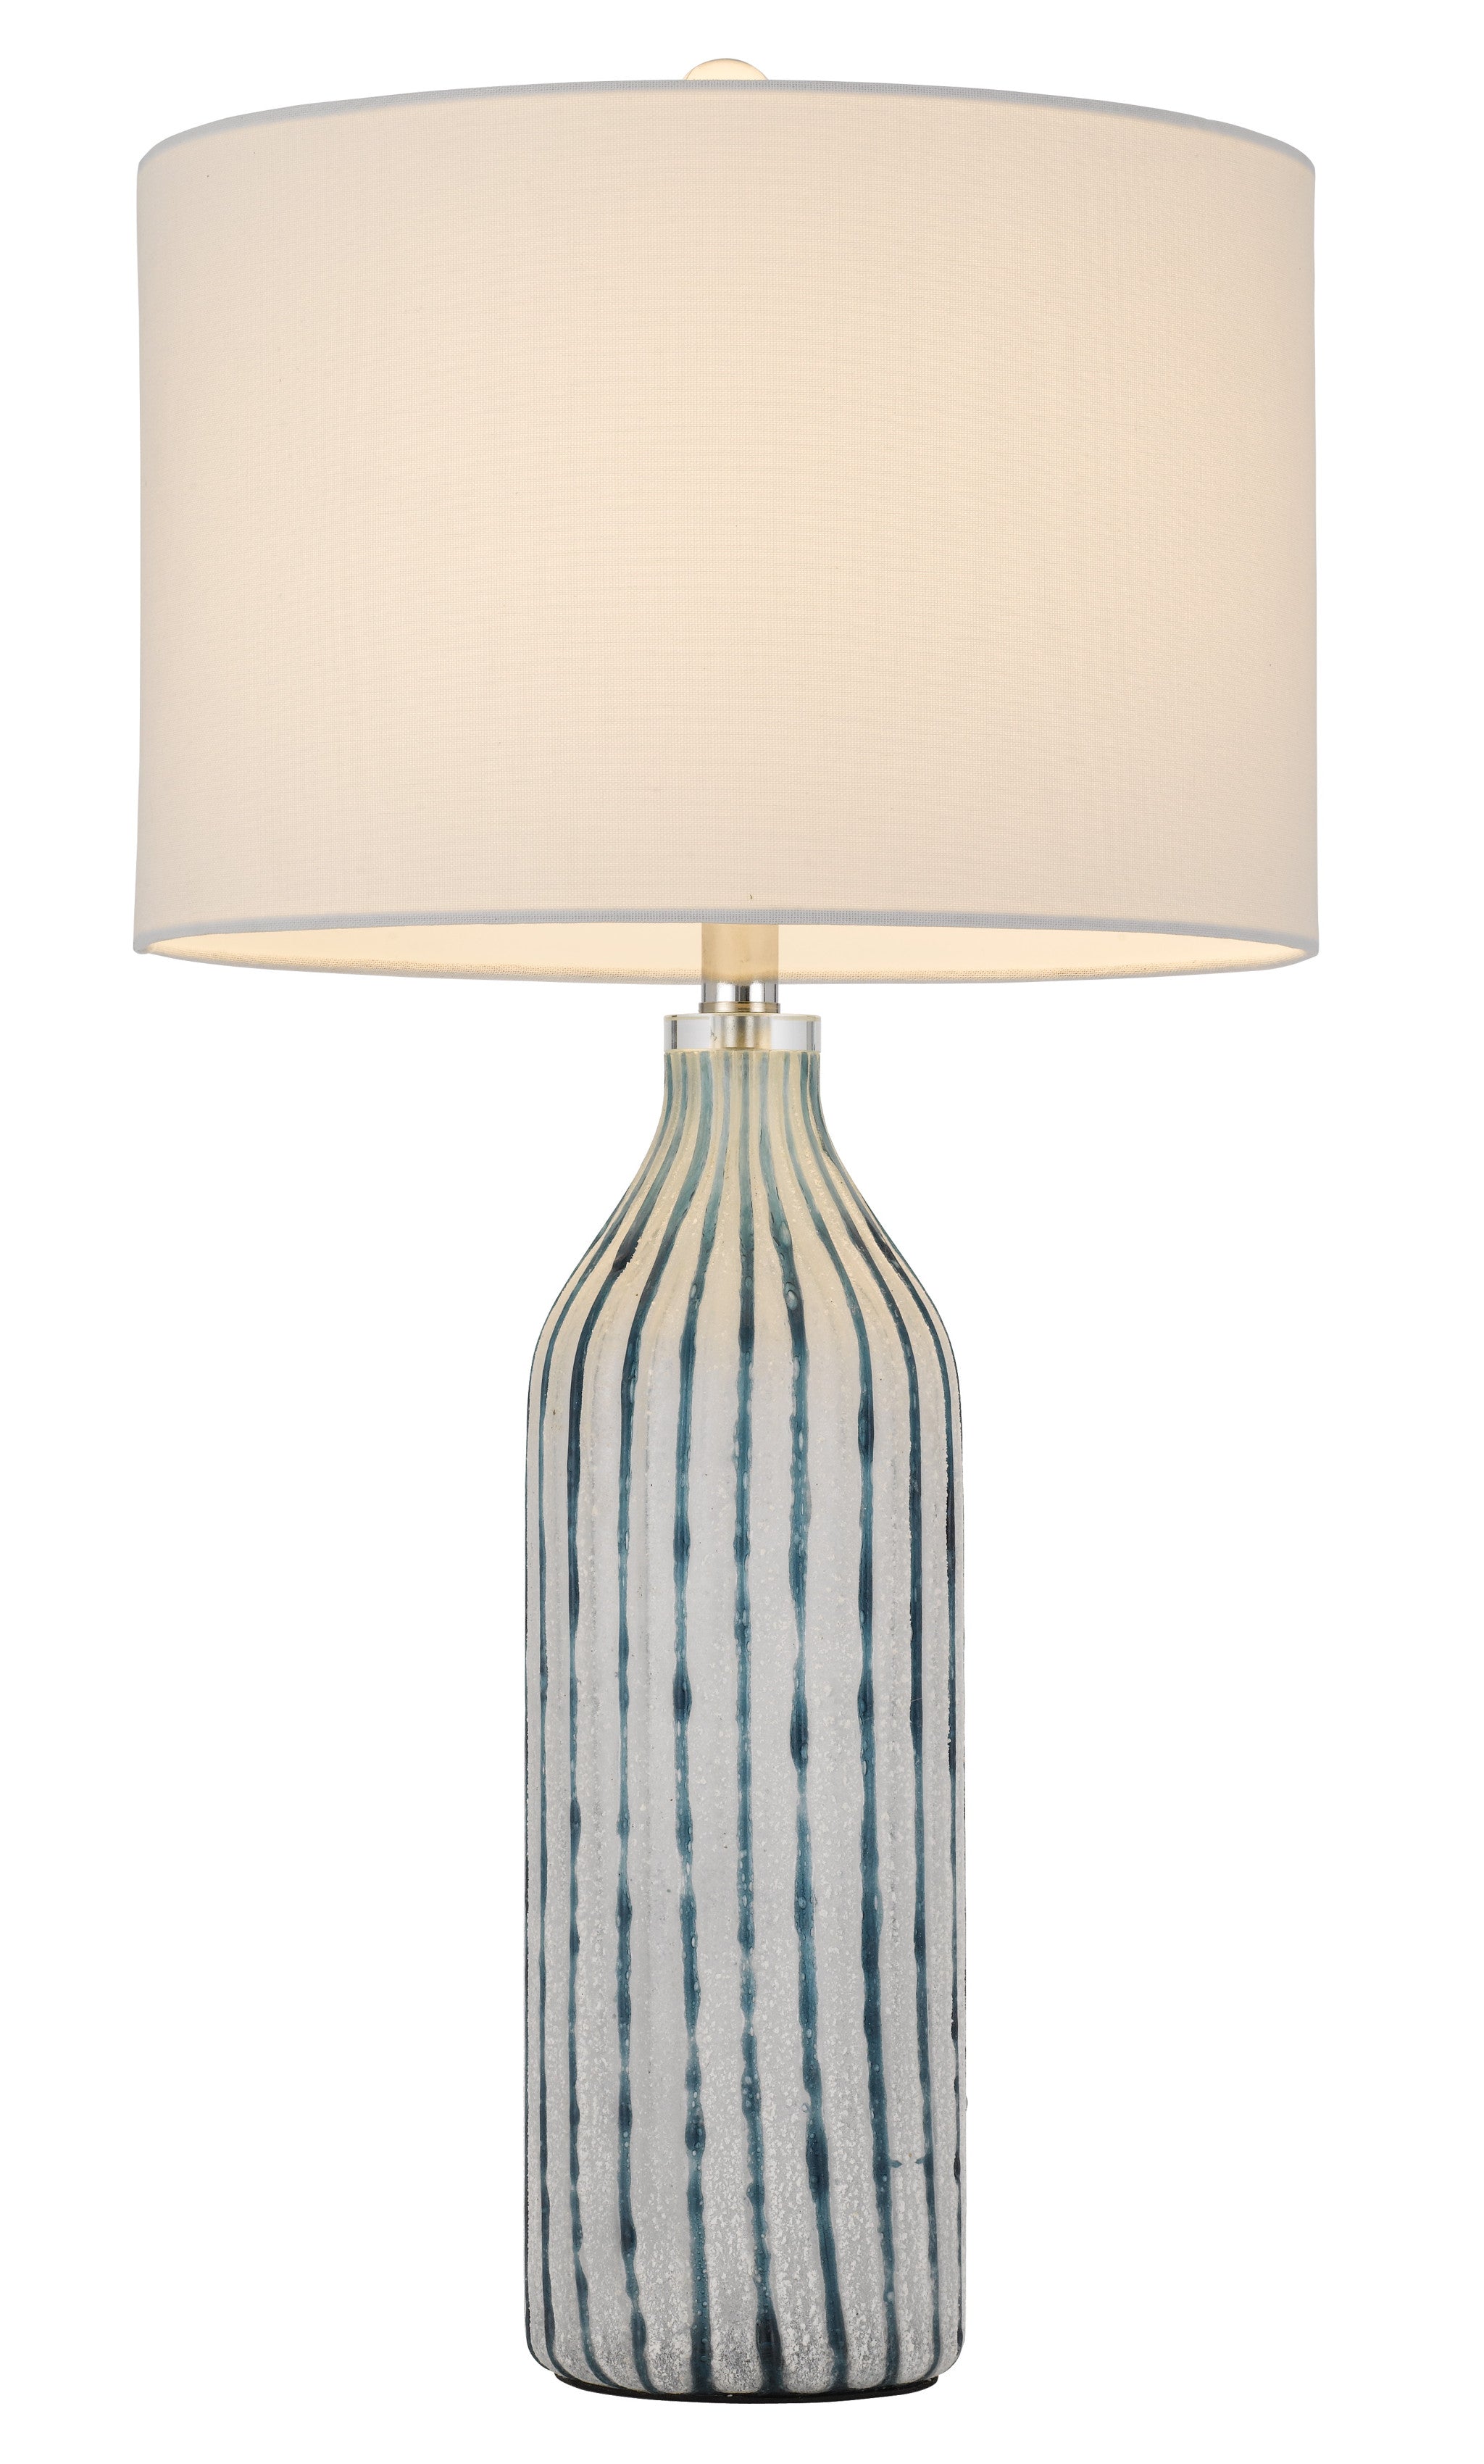 30" Aqua and Gray Glass Table Lamp With White Drum Shade